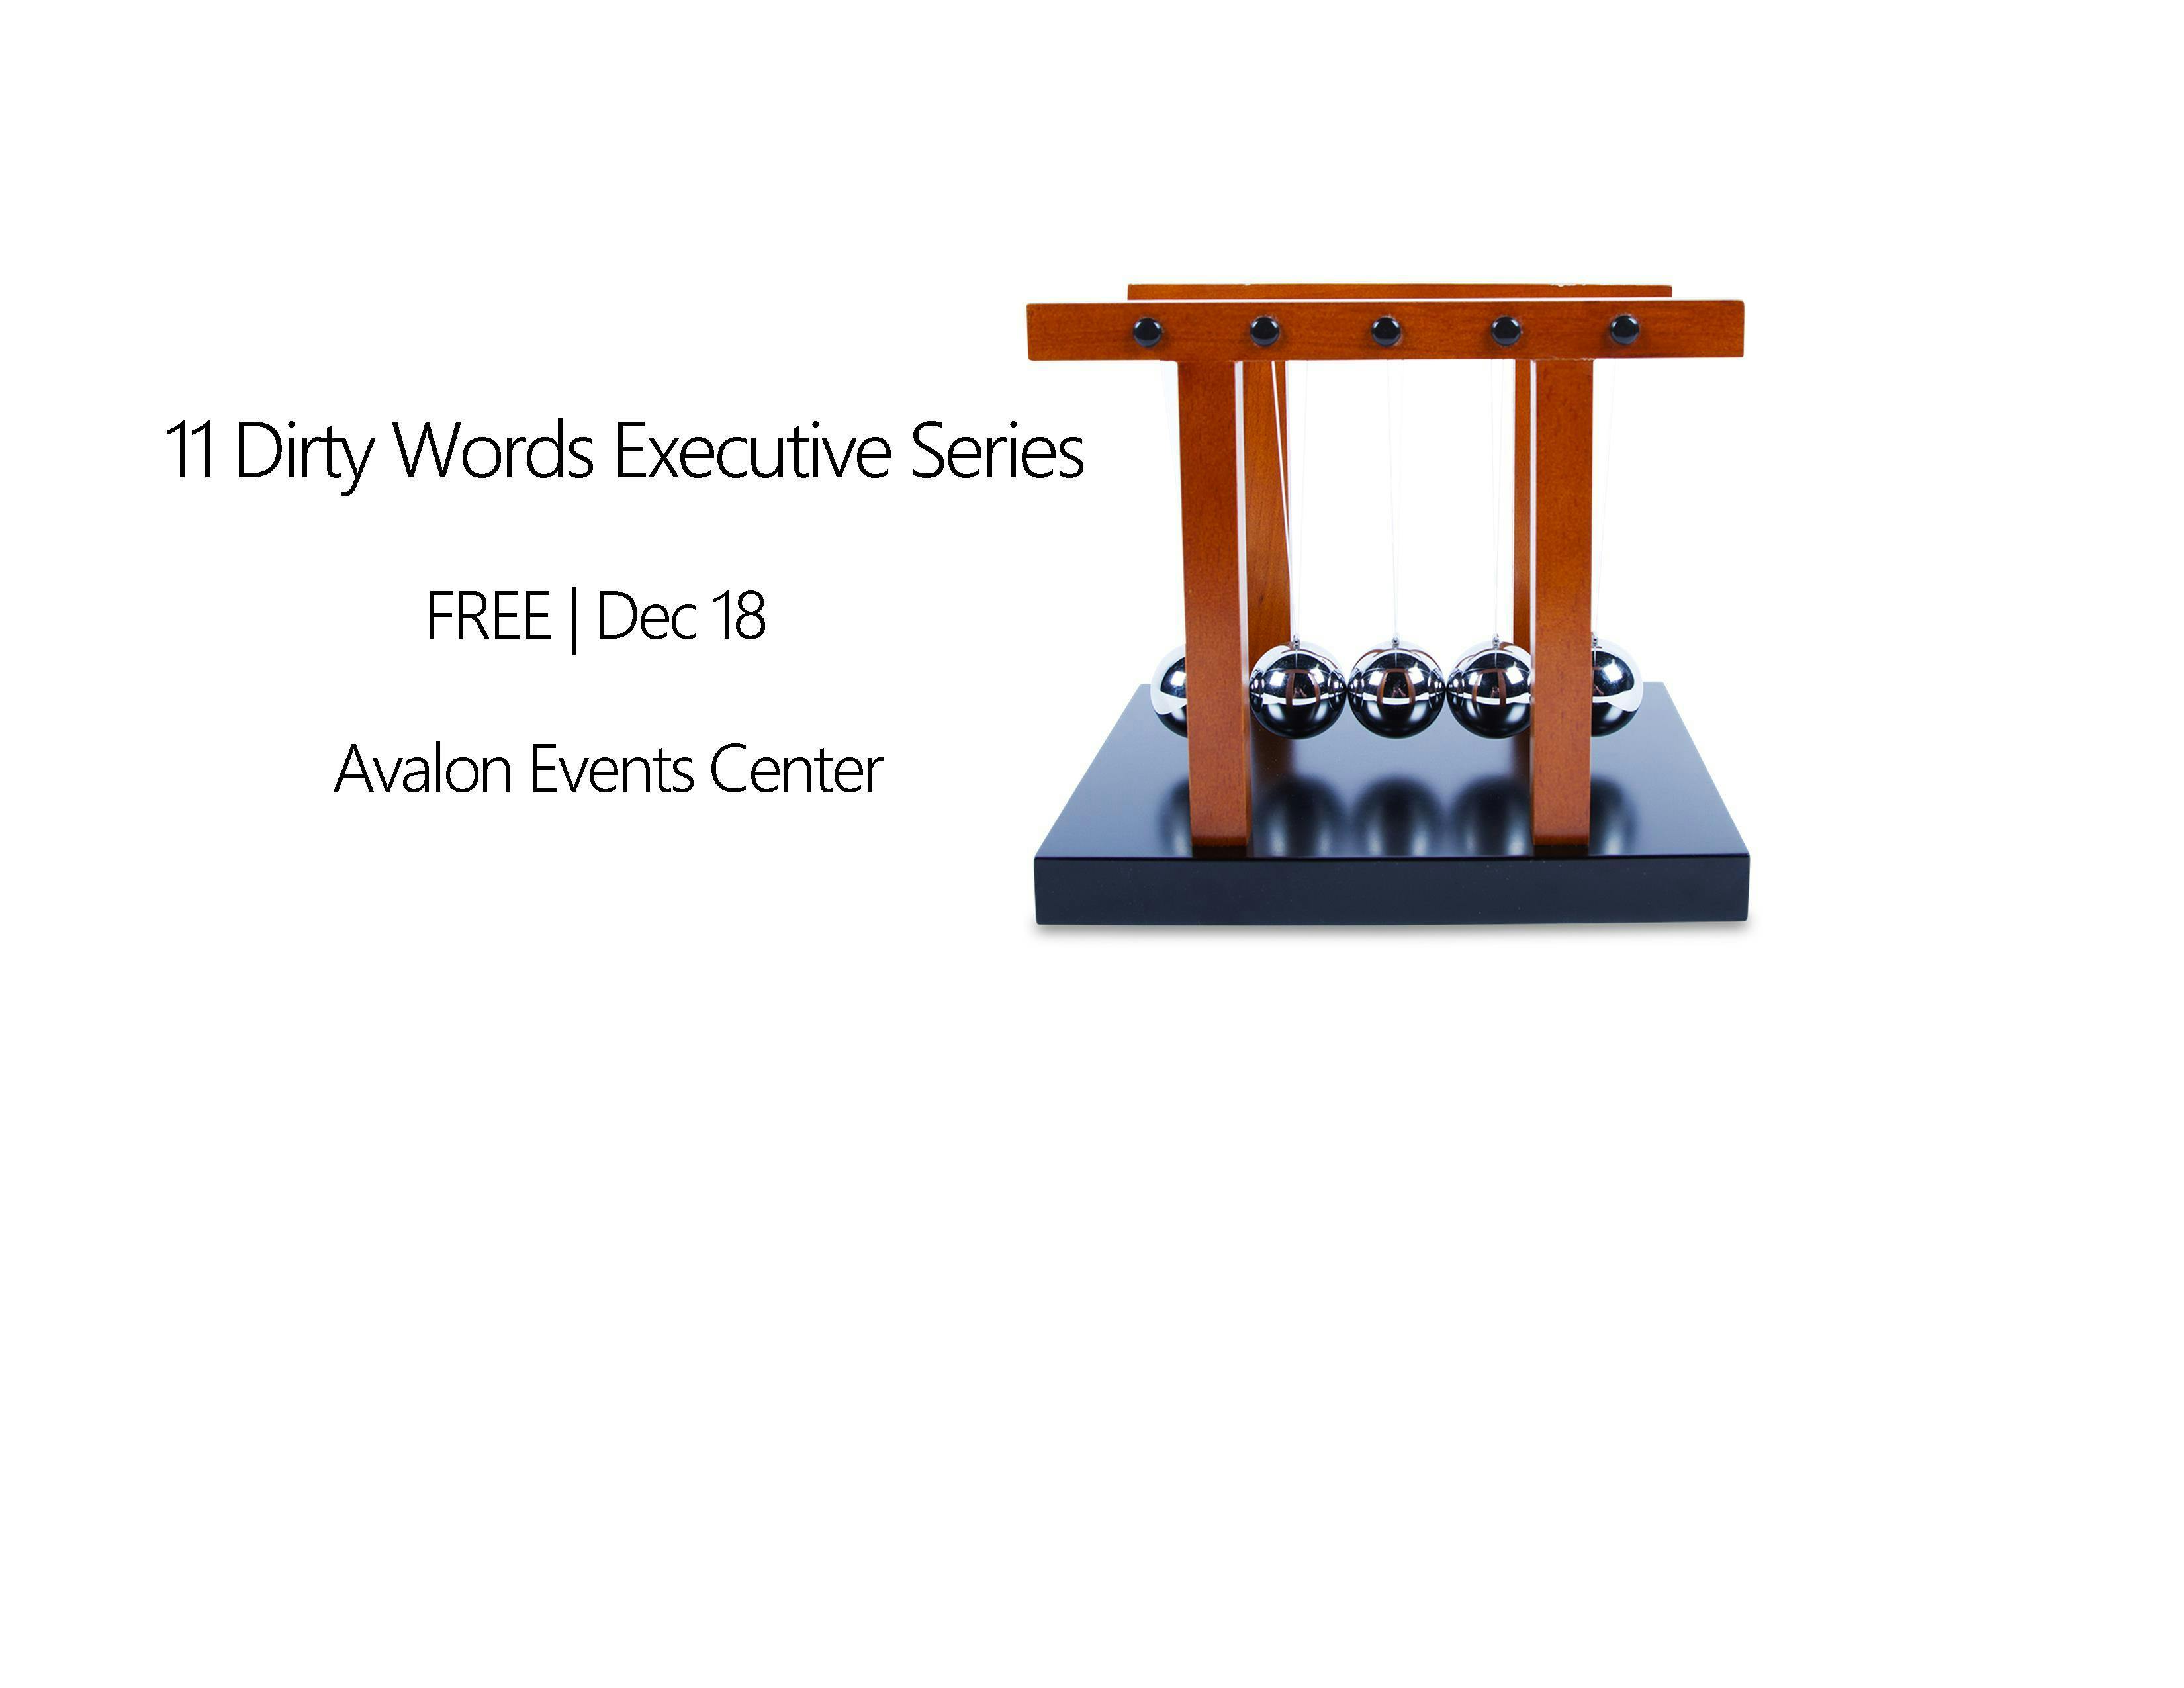 FREE: 11 Dirty Words Lunch and Executive Discussion